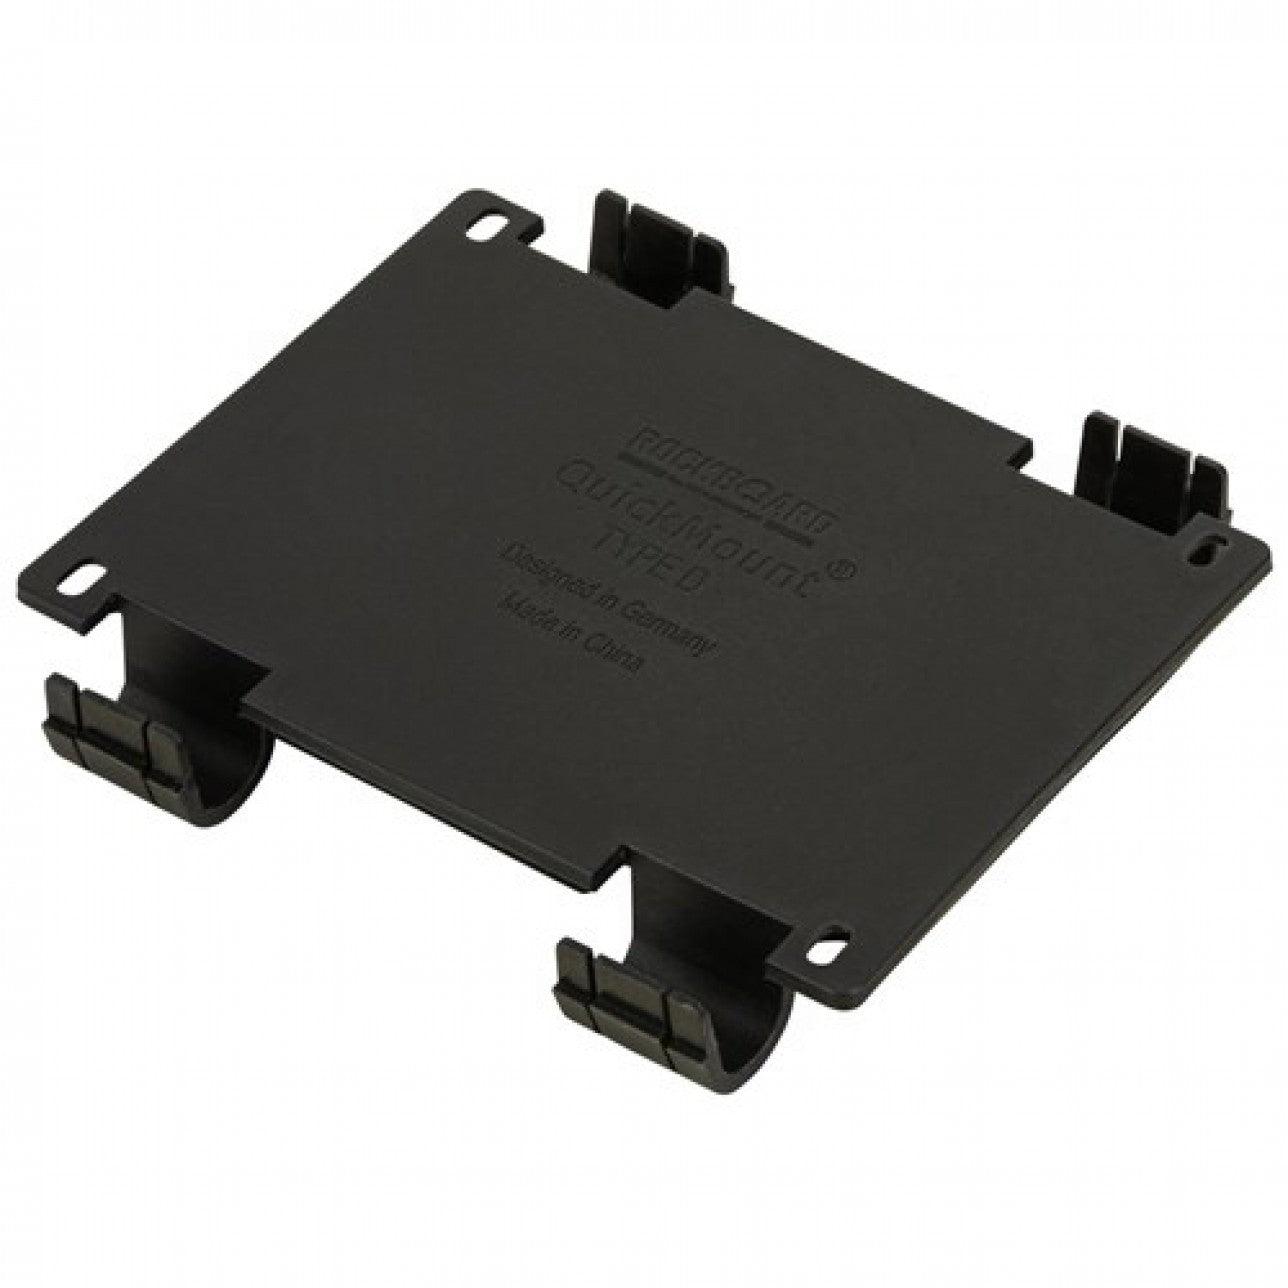 RockBoard QuickMount Type D - Pedal Mounting Plate for Large Horizontal Pedals - Pedal Boards - Accessories by Rockboard at Muso's Stuff